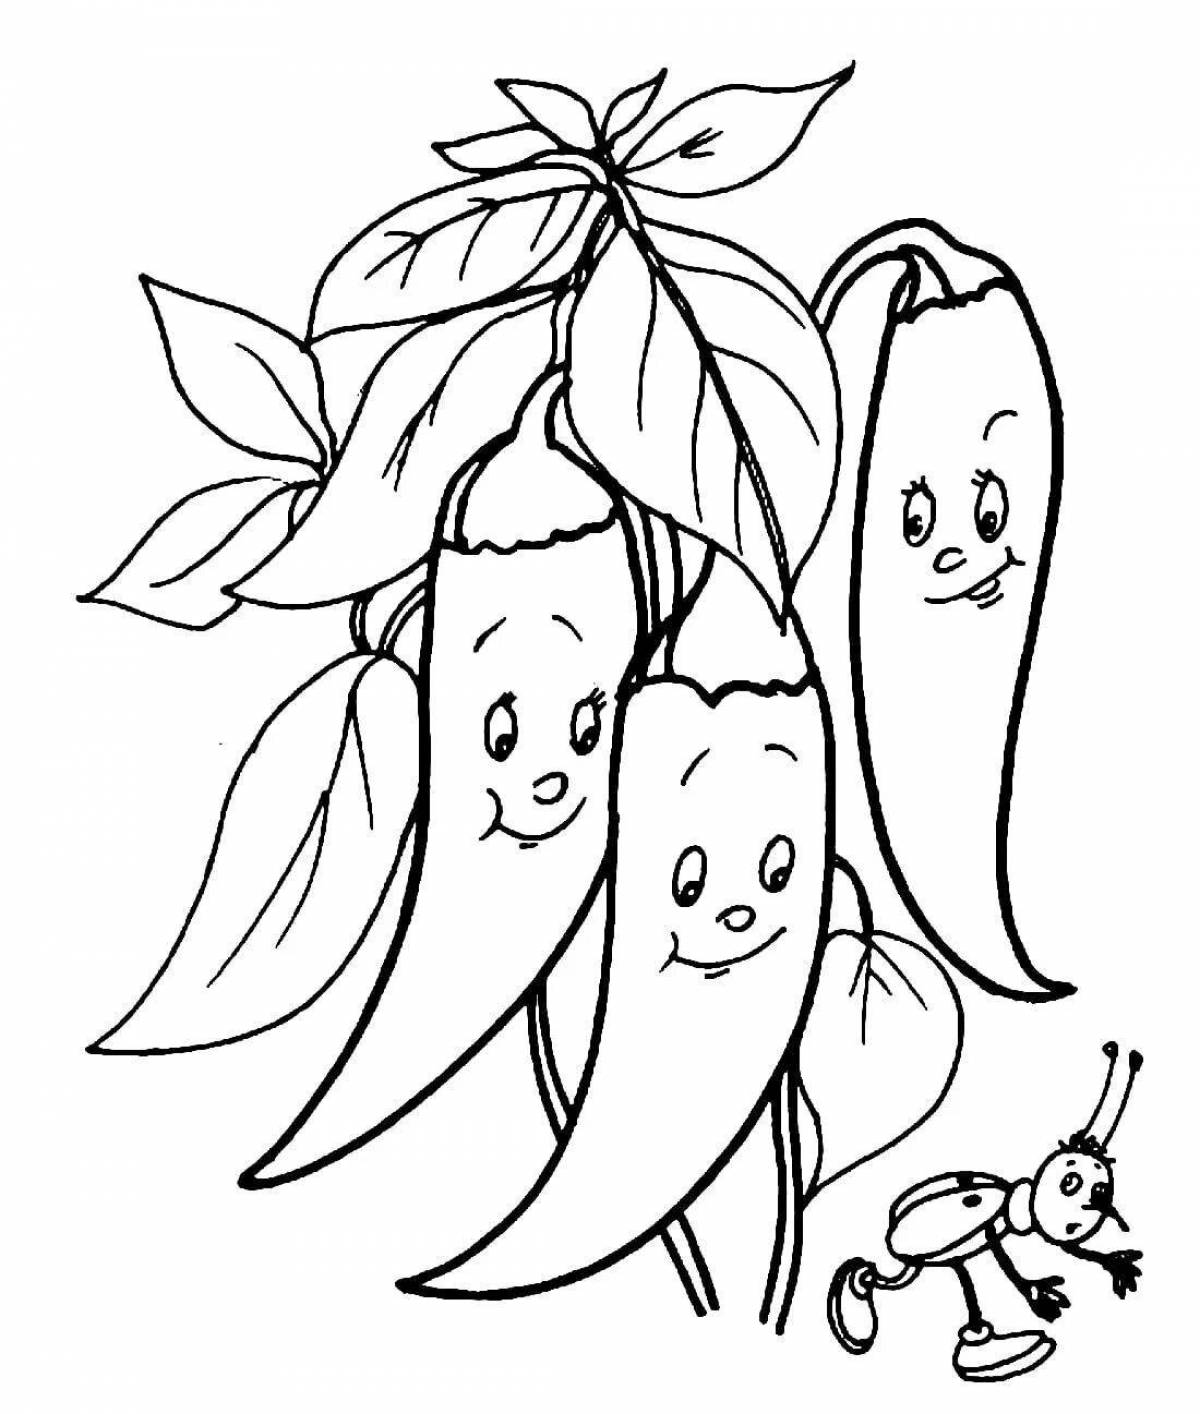 Children's coloring peppers